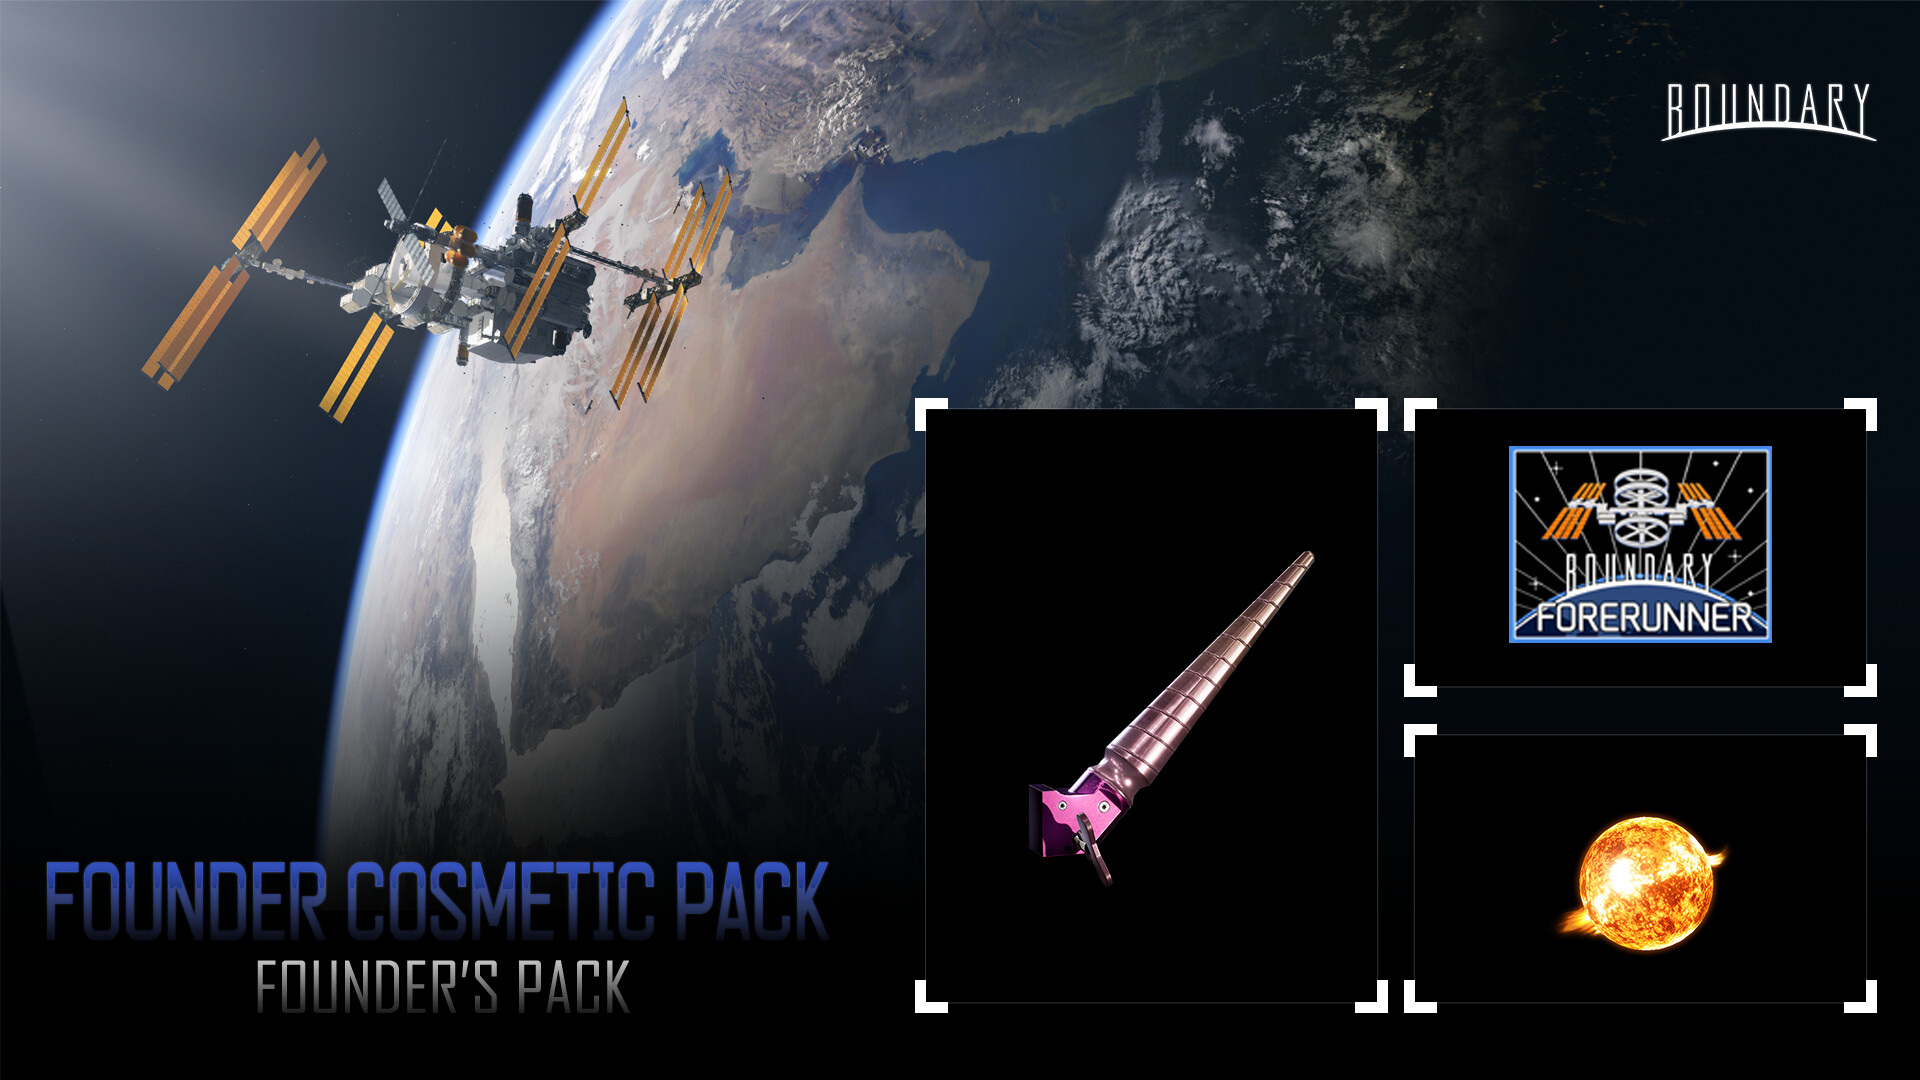 Boundary - Founder Cosmetic Pack Founders Pack Featured Screenshot #1